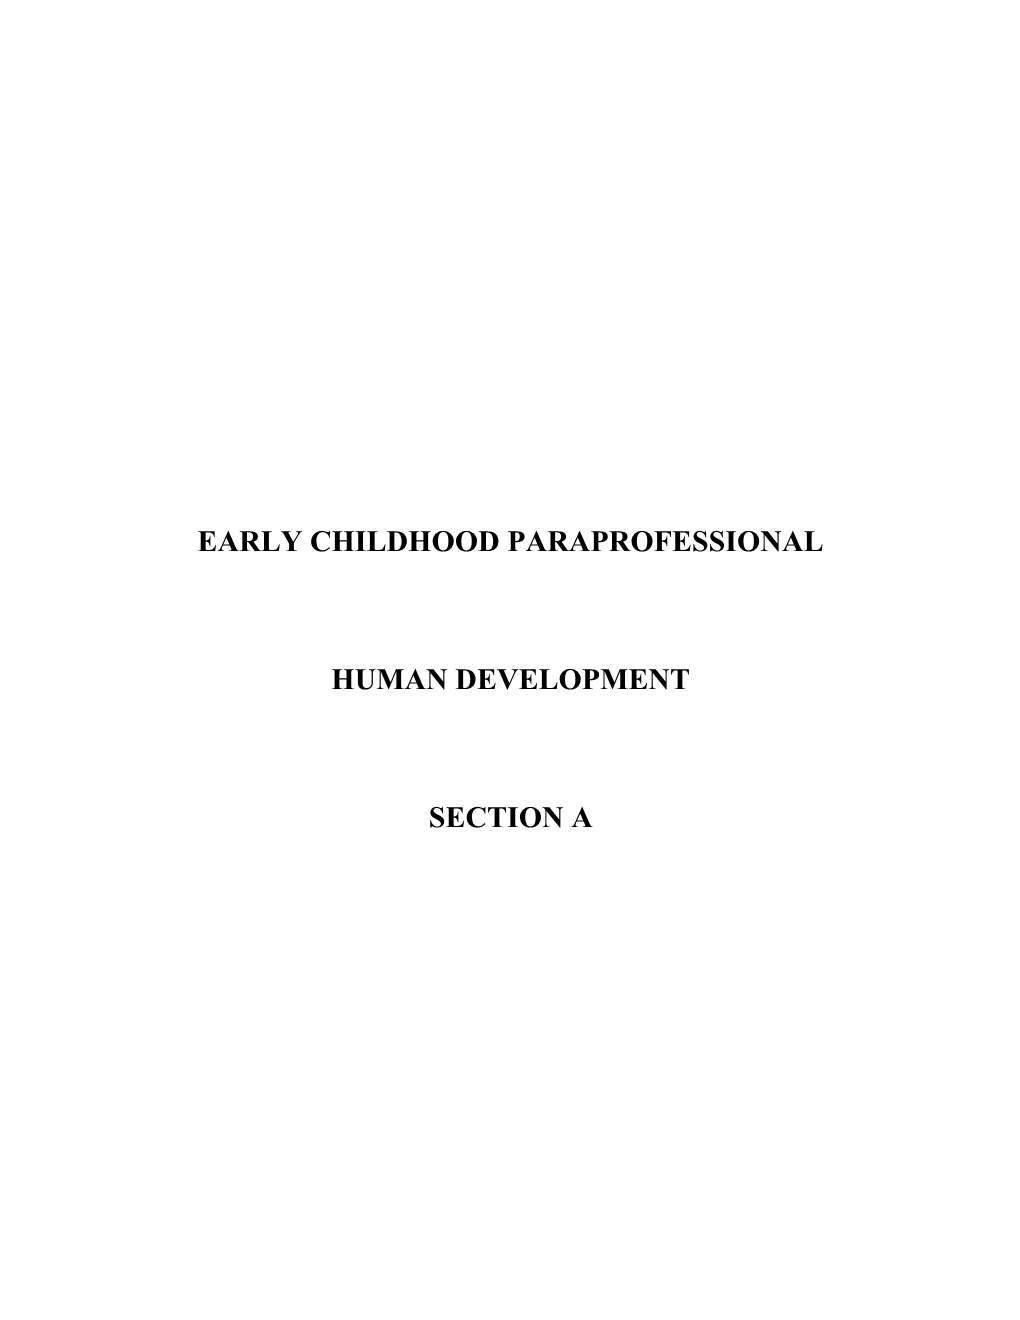 Early Childhood Paraprofessional Module